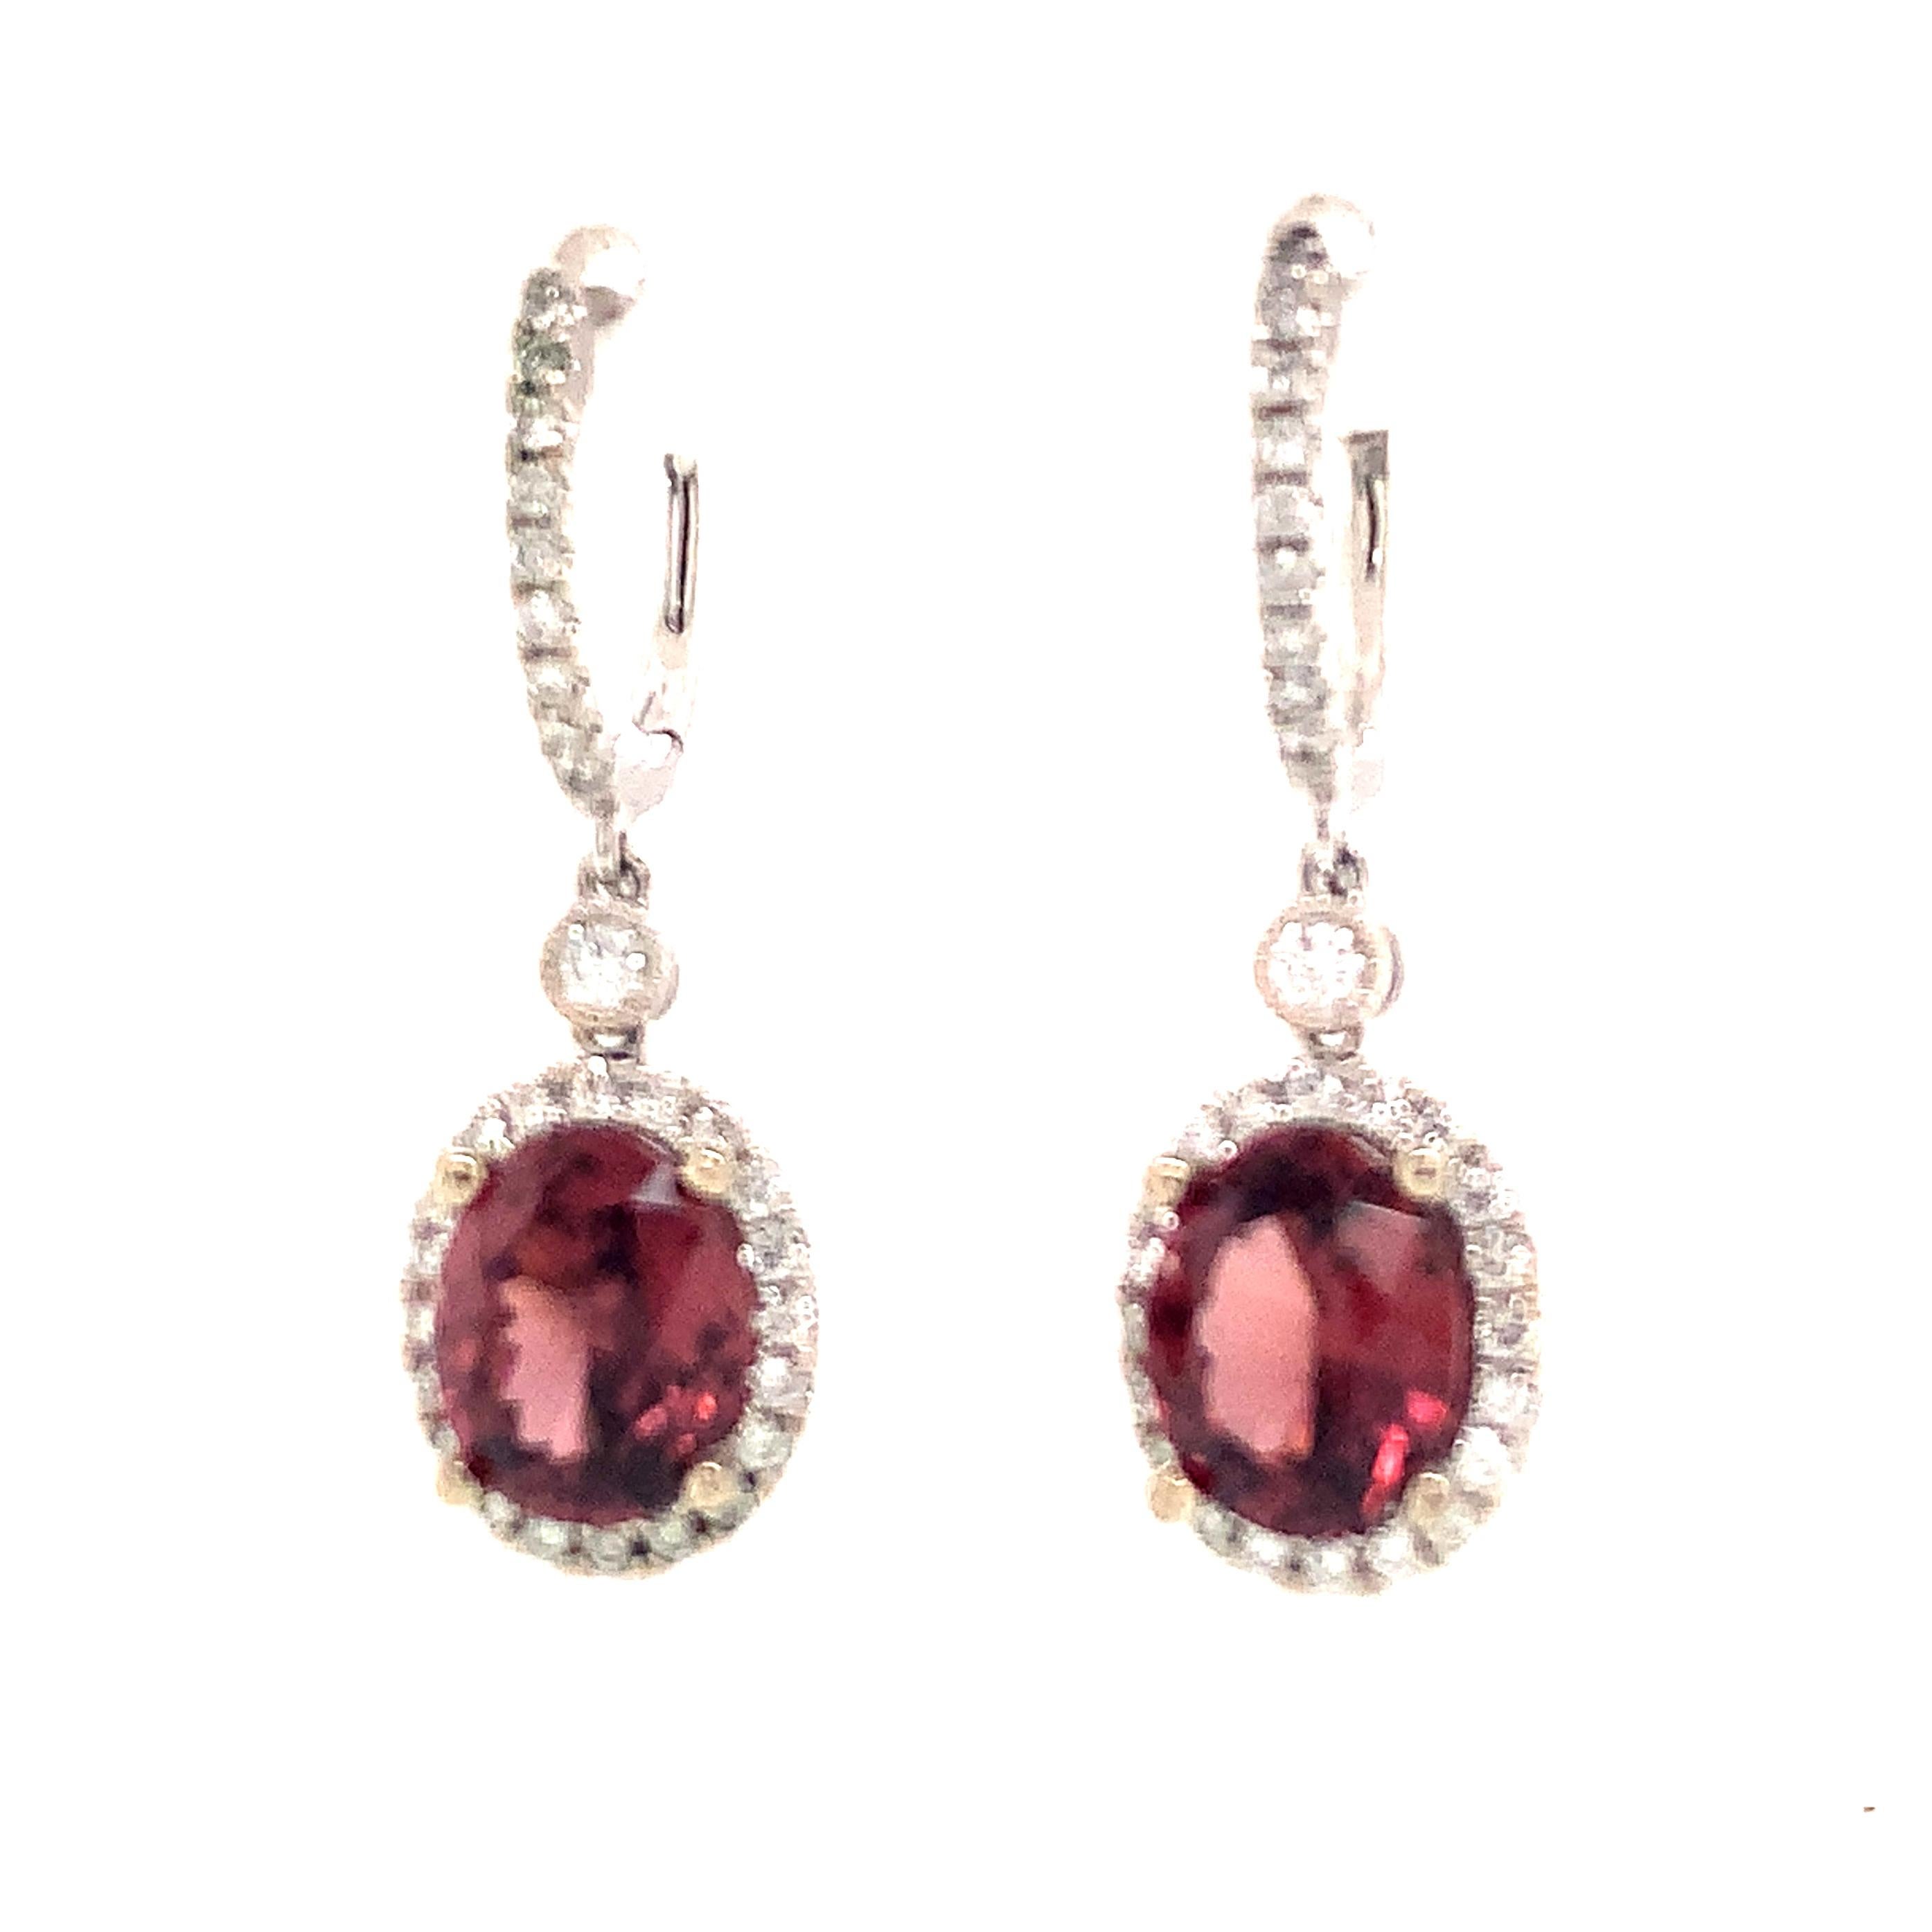 Natural Tourmaline Rubellite Diamond Earrings 18k Gold 6.62 TCW Certified For Sale 4